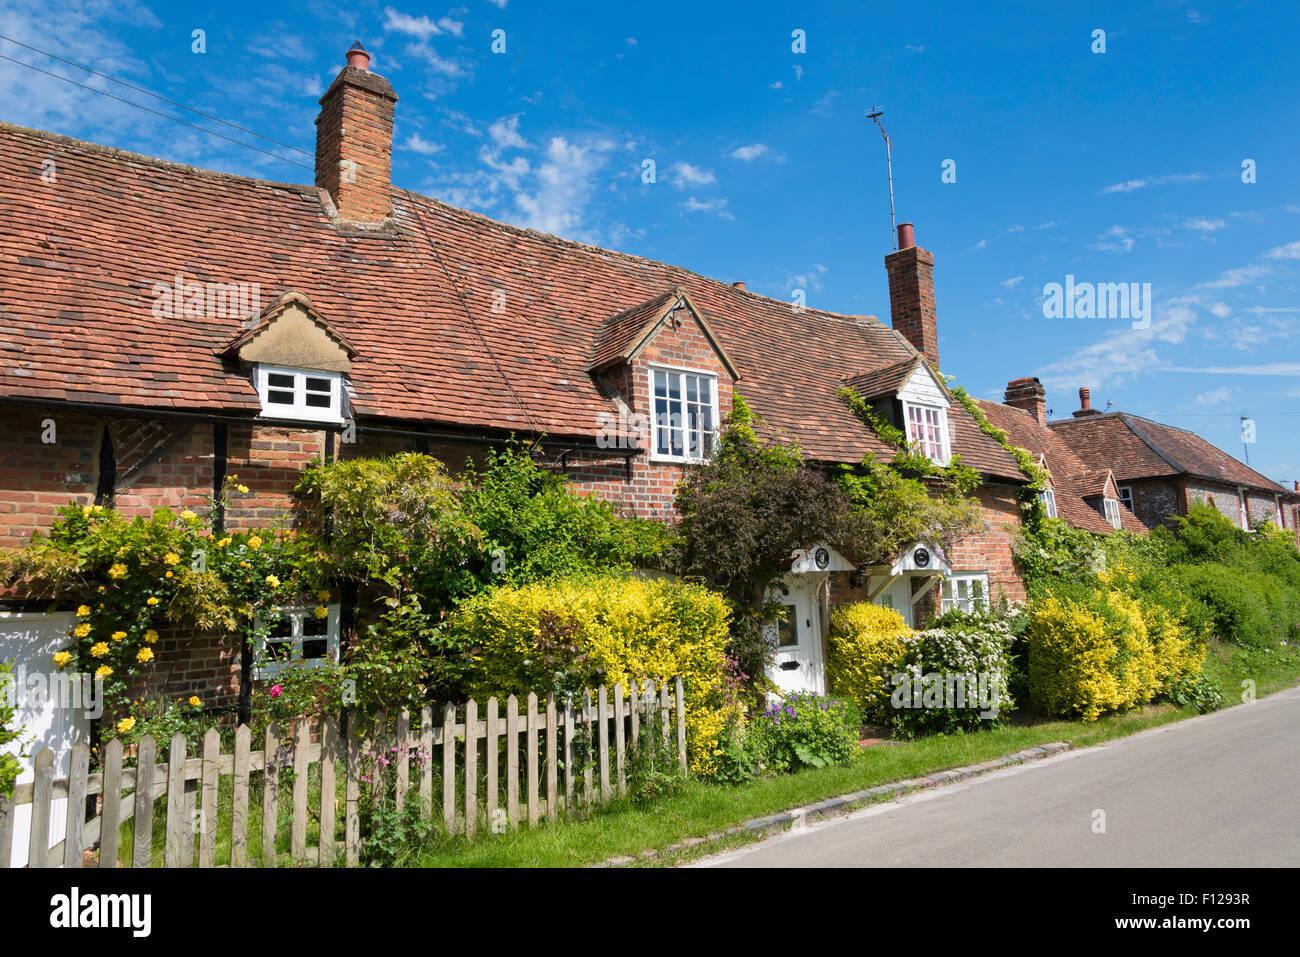 Cottages di Turville, Henley-on-Thames, Buckinghamshire, Inghilterra, Regno Unito. Foto Stock